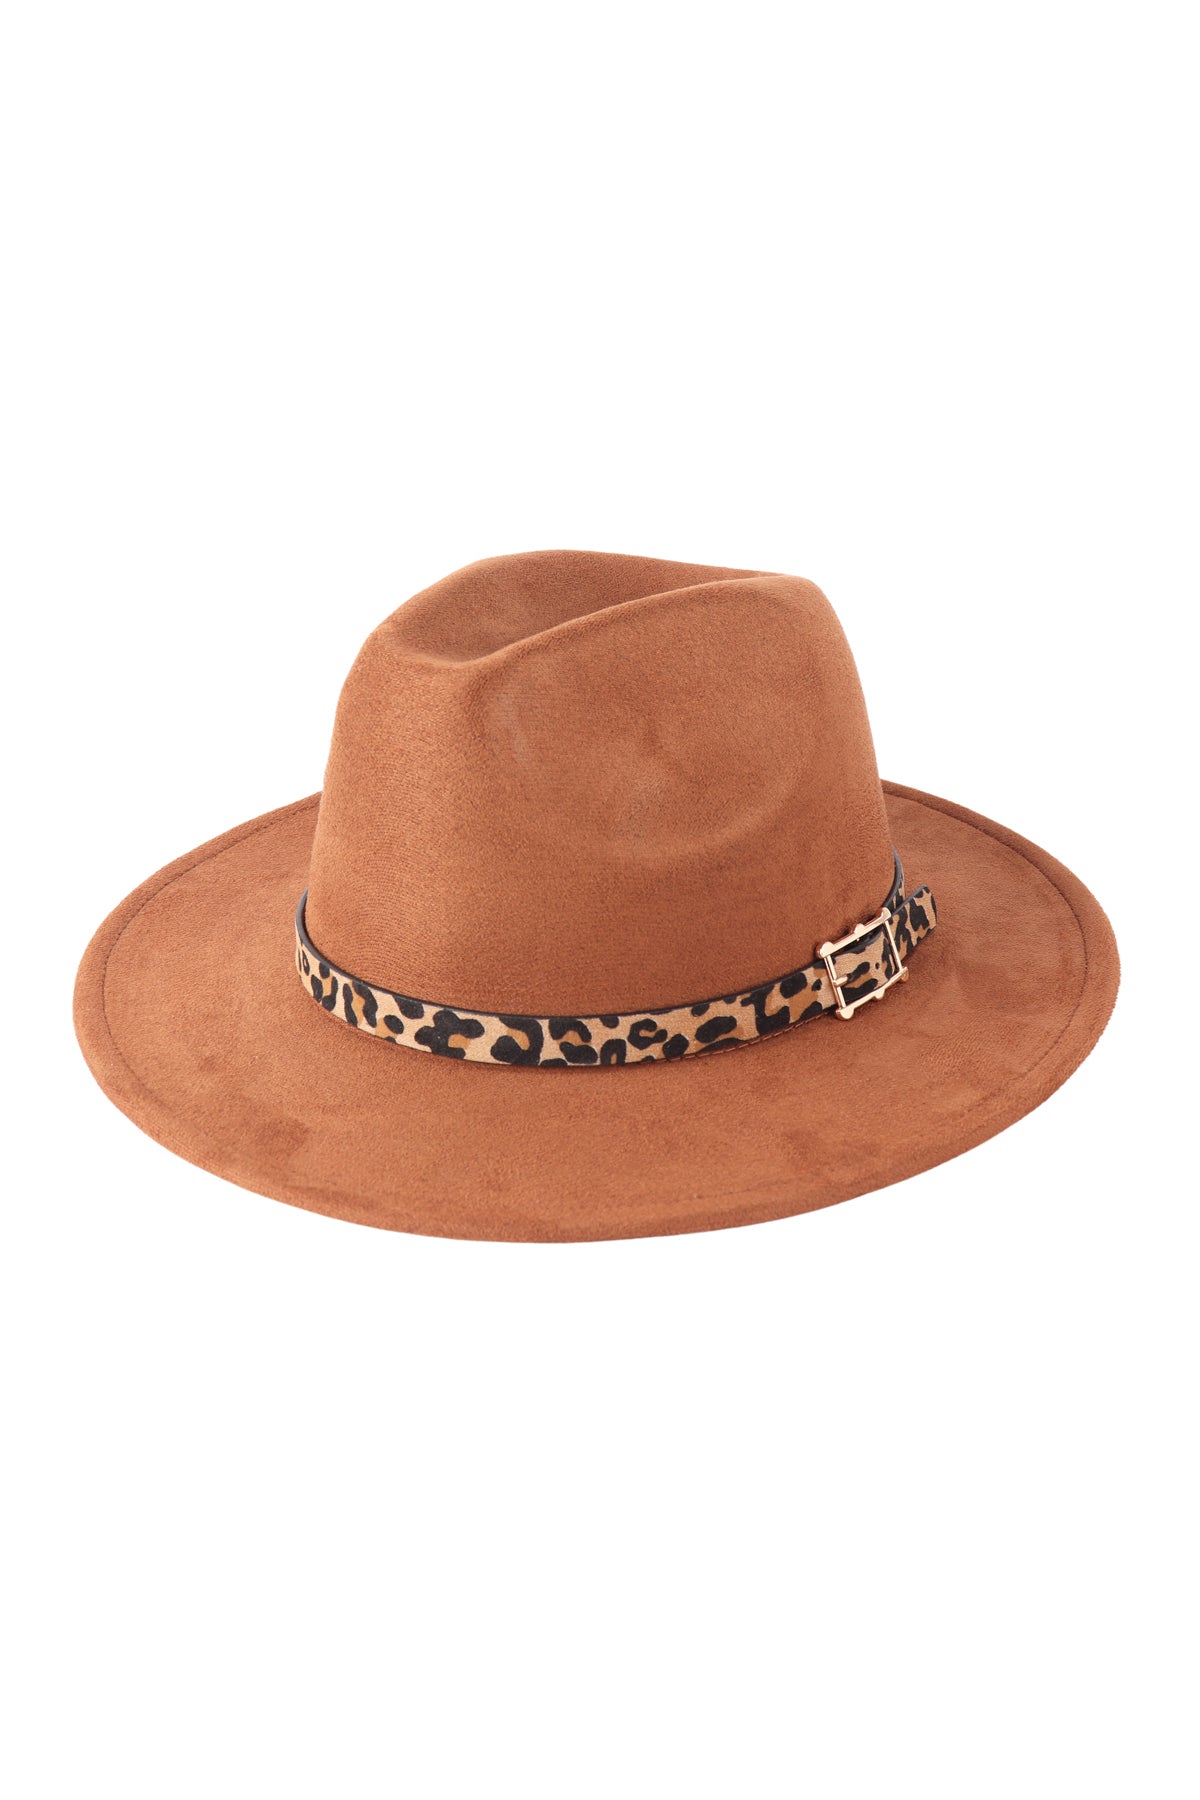 FASHION BRIM HAT WITH LEOPARD ACCENT/6PCS (NOW $3.50 ONLY!)